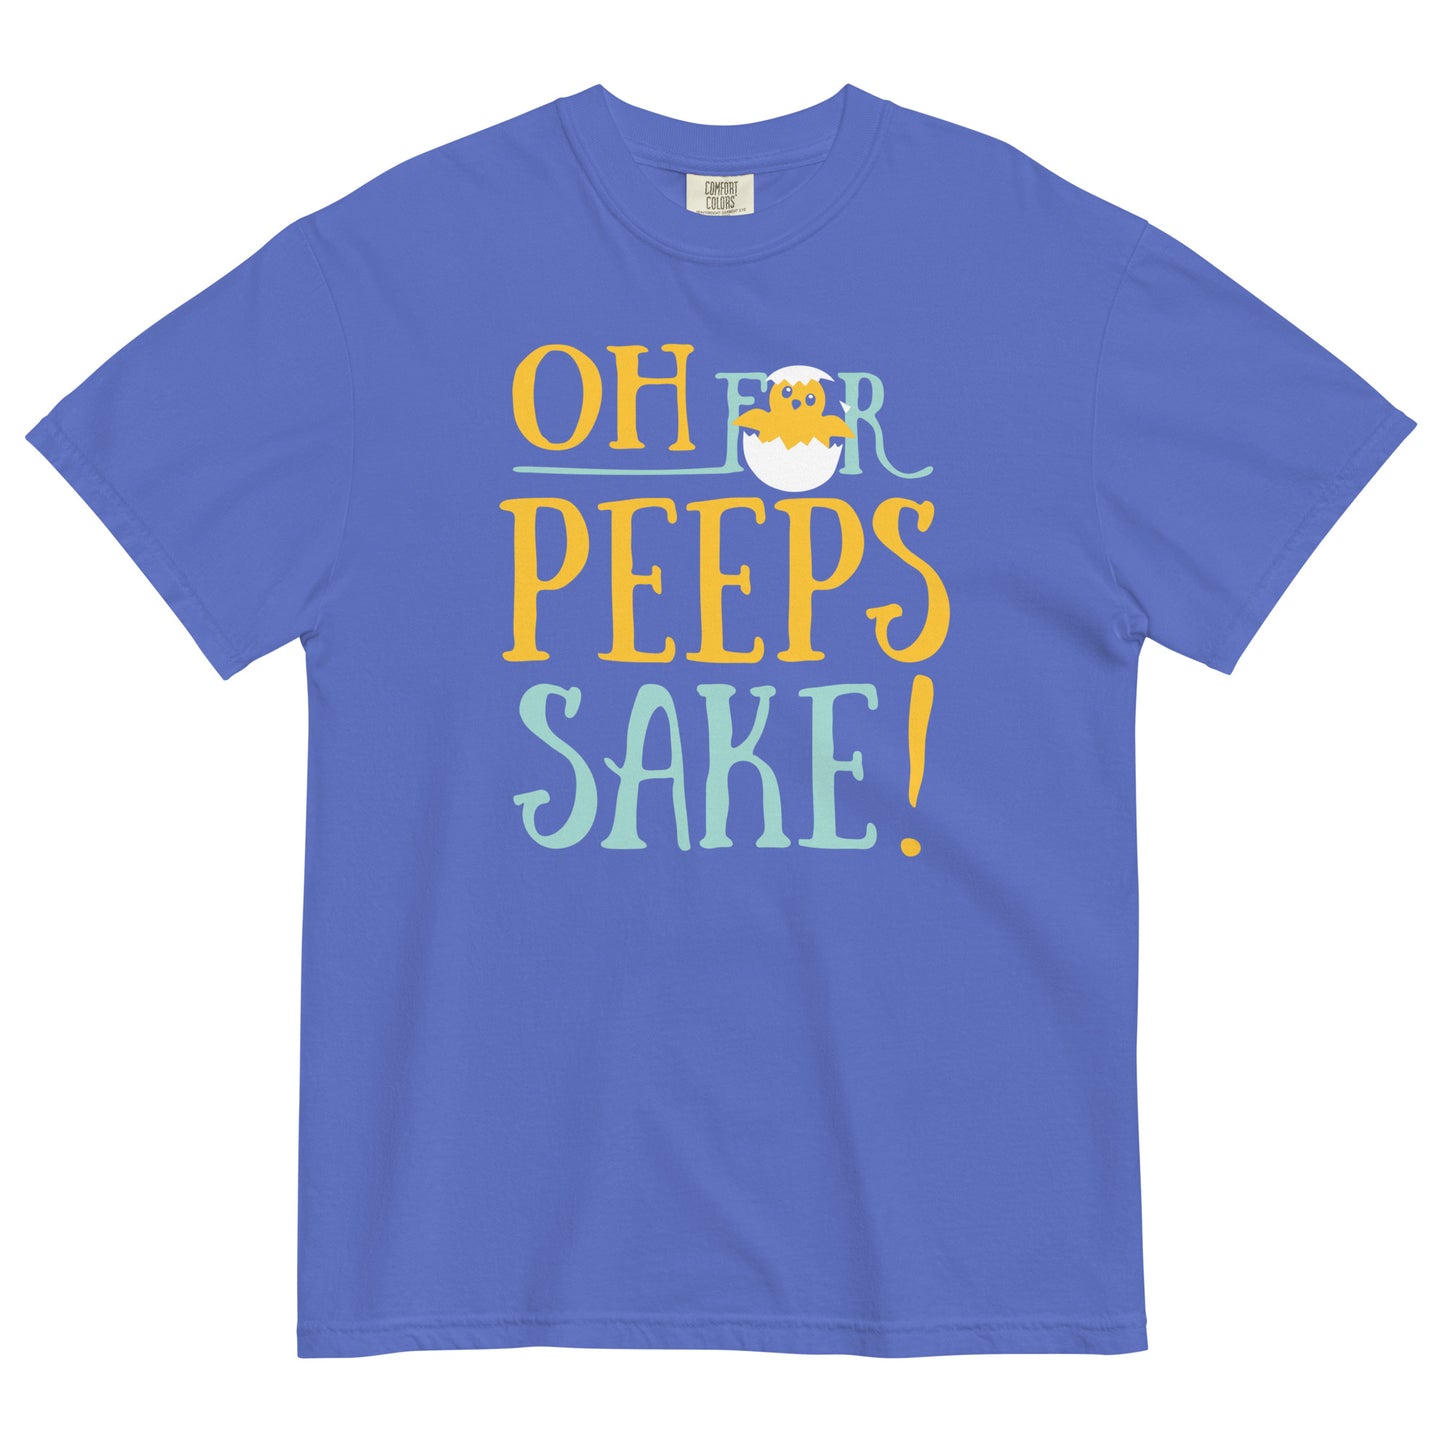 Oh For Peeps Sake Men's Relaxed Fit Tee